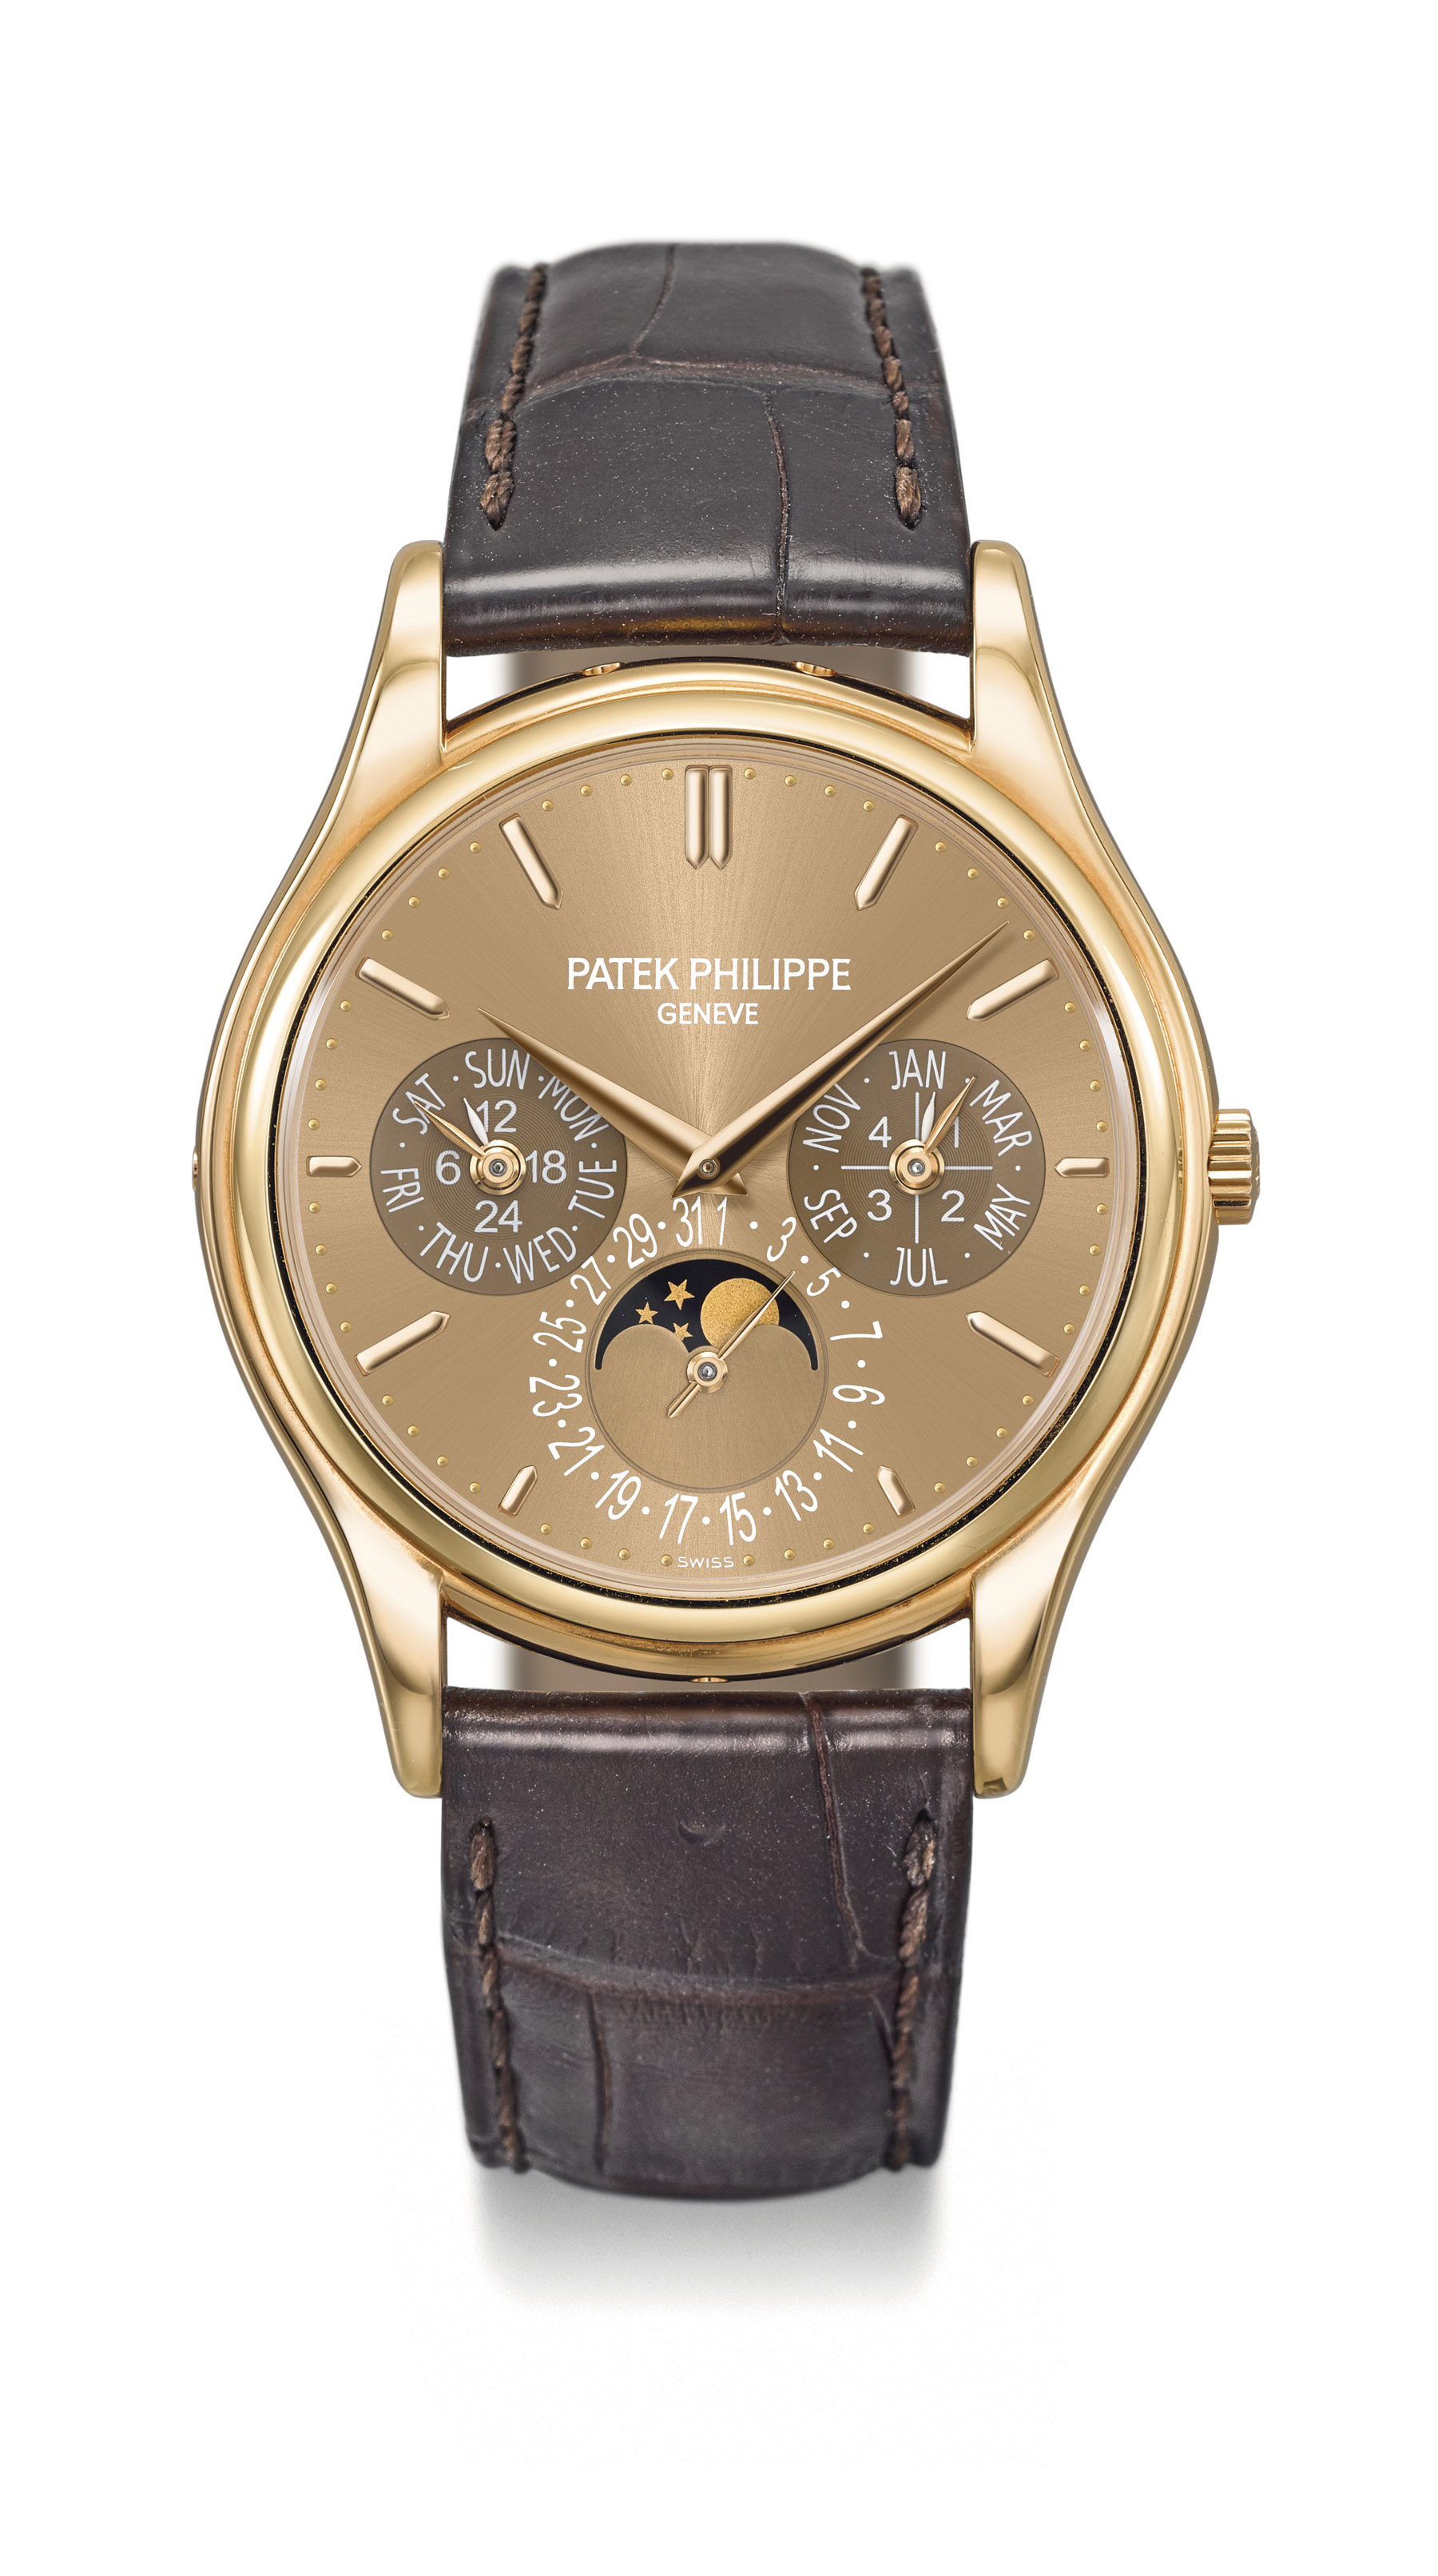 Patek Philippe. A very fine 18K pink gold automatic perpetual calendar wristwatch with moon phases, 24 hour, leap year indication and brown dial Ref. 5140R-001, circa 2010 Estimate CHF 30,000 – 50,000